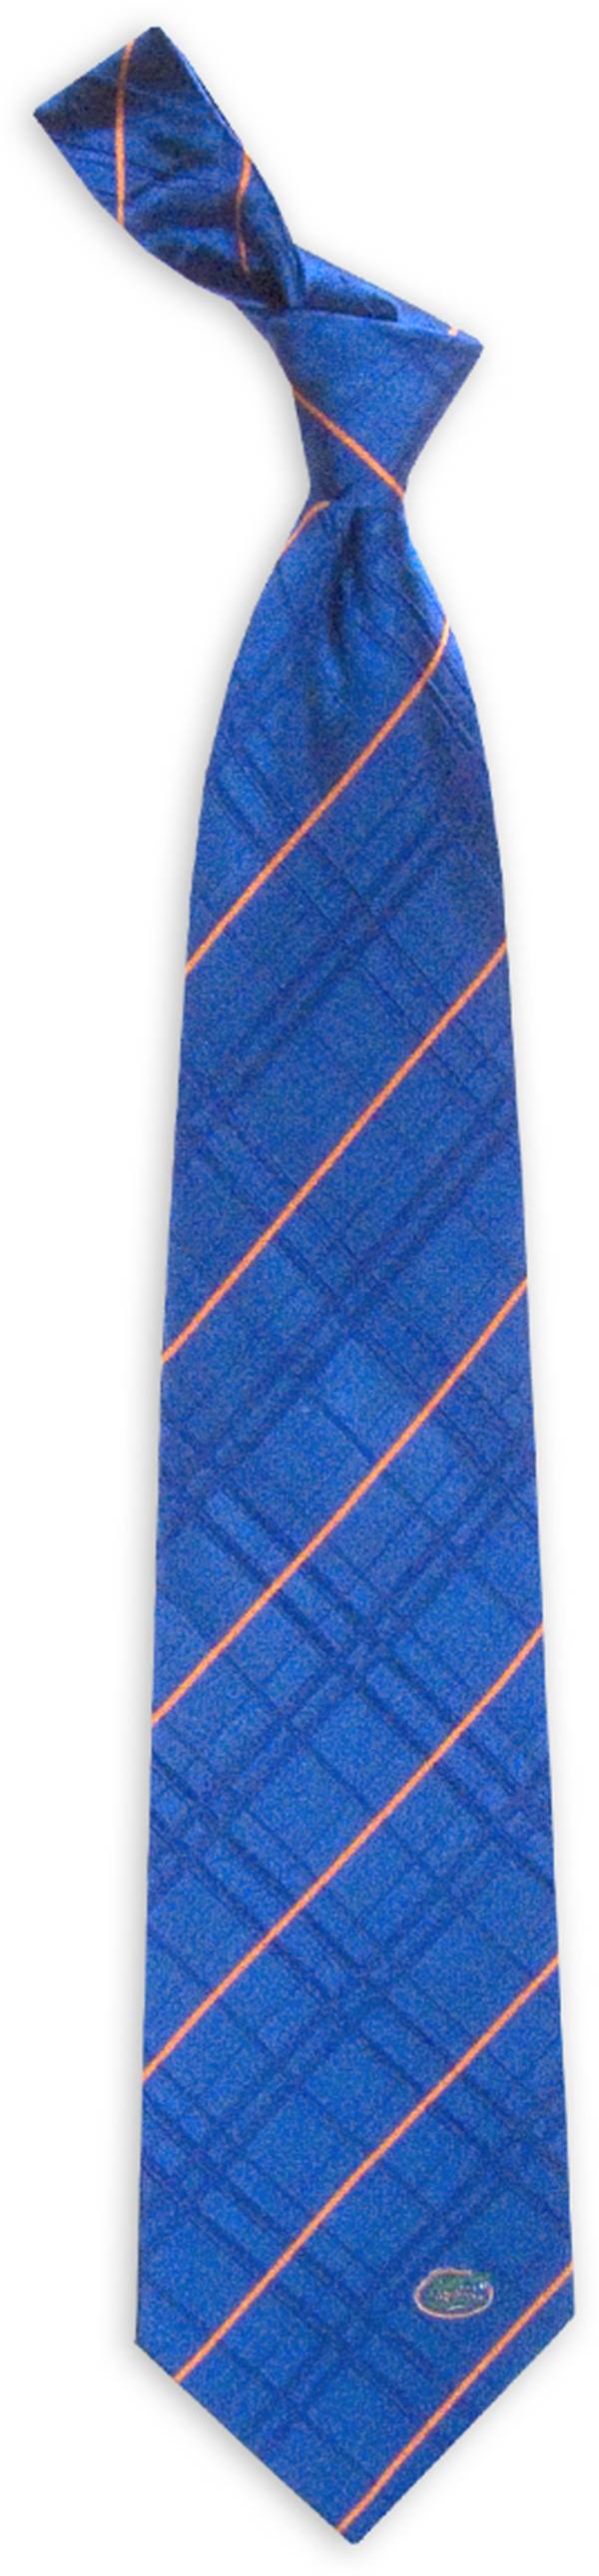 Eagles Wings Florida Gators Woven Oxford Necktie product image